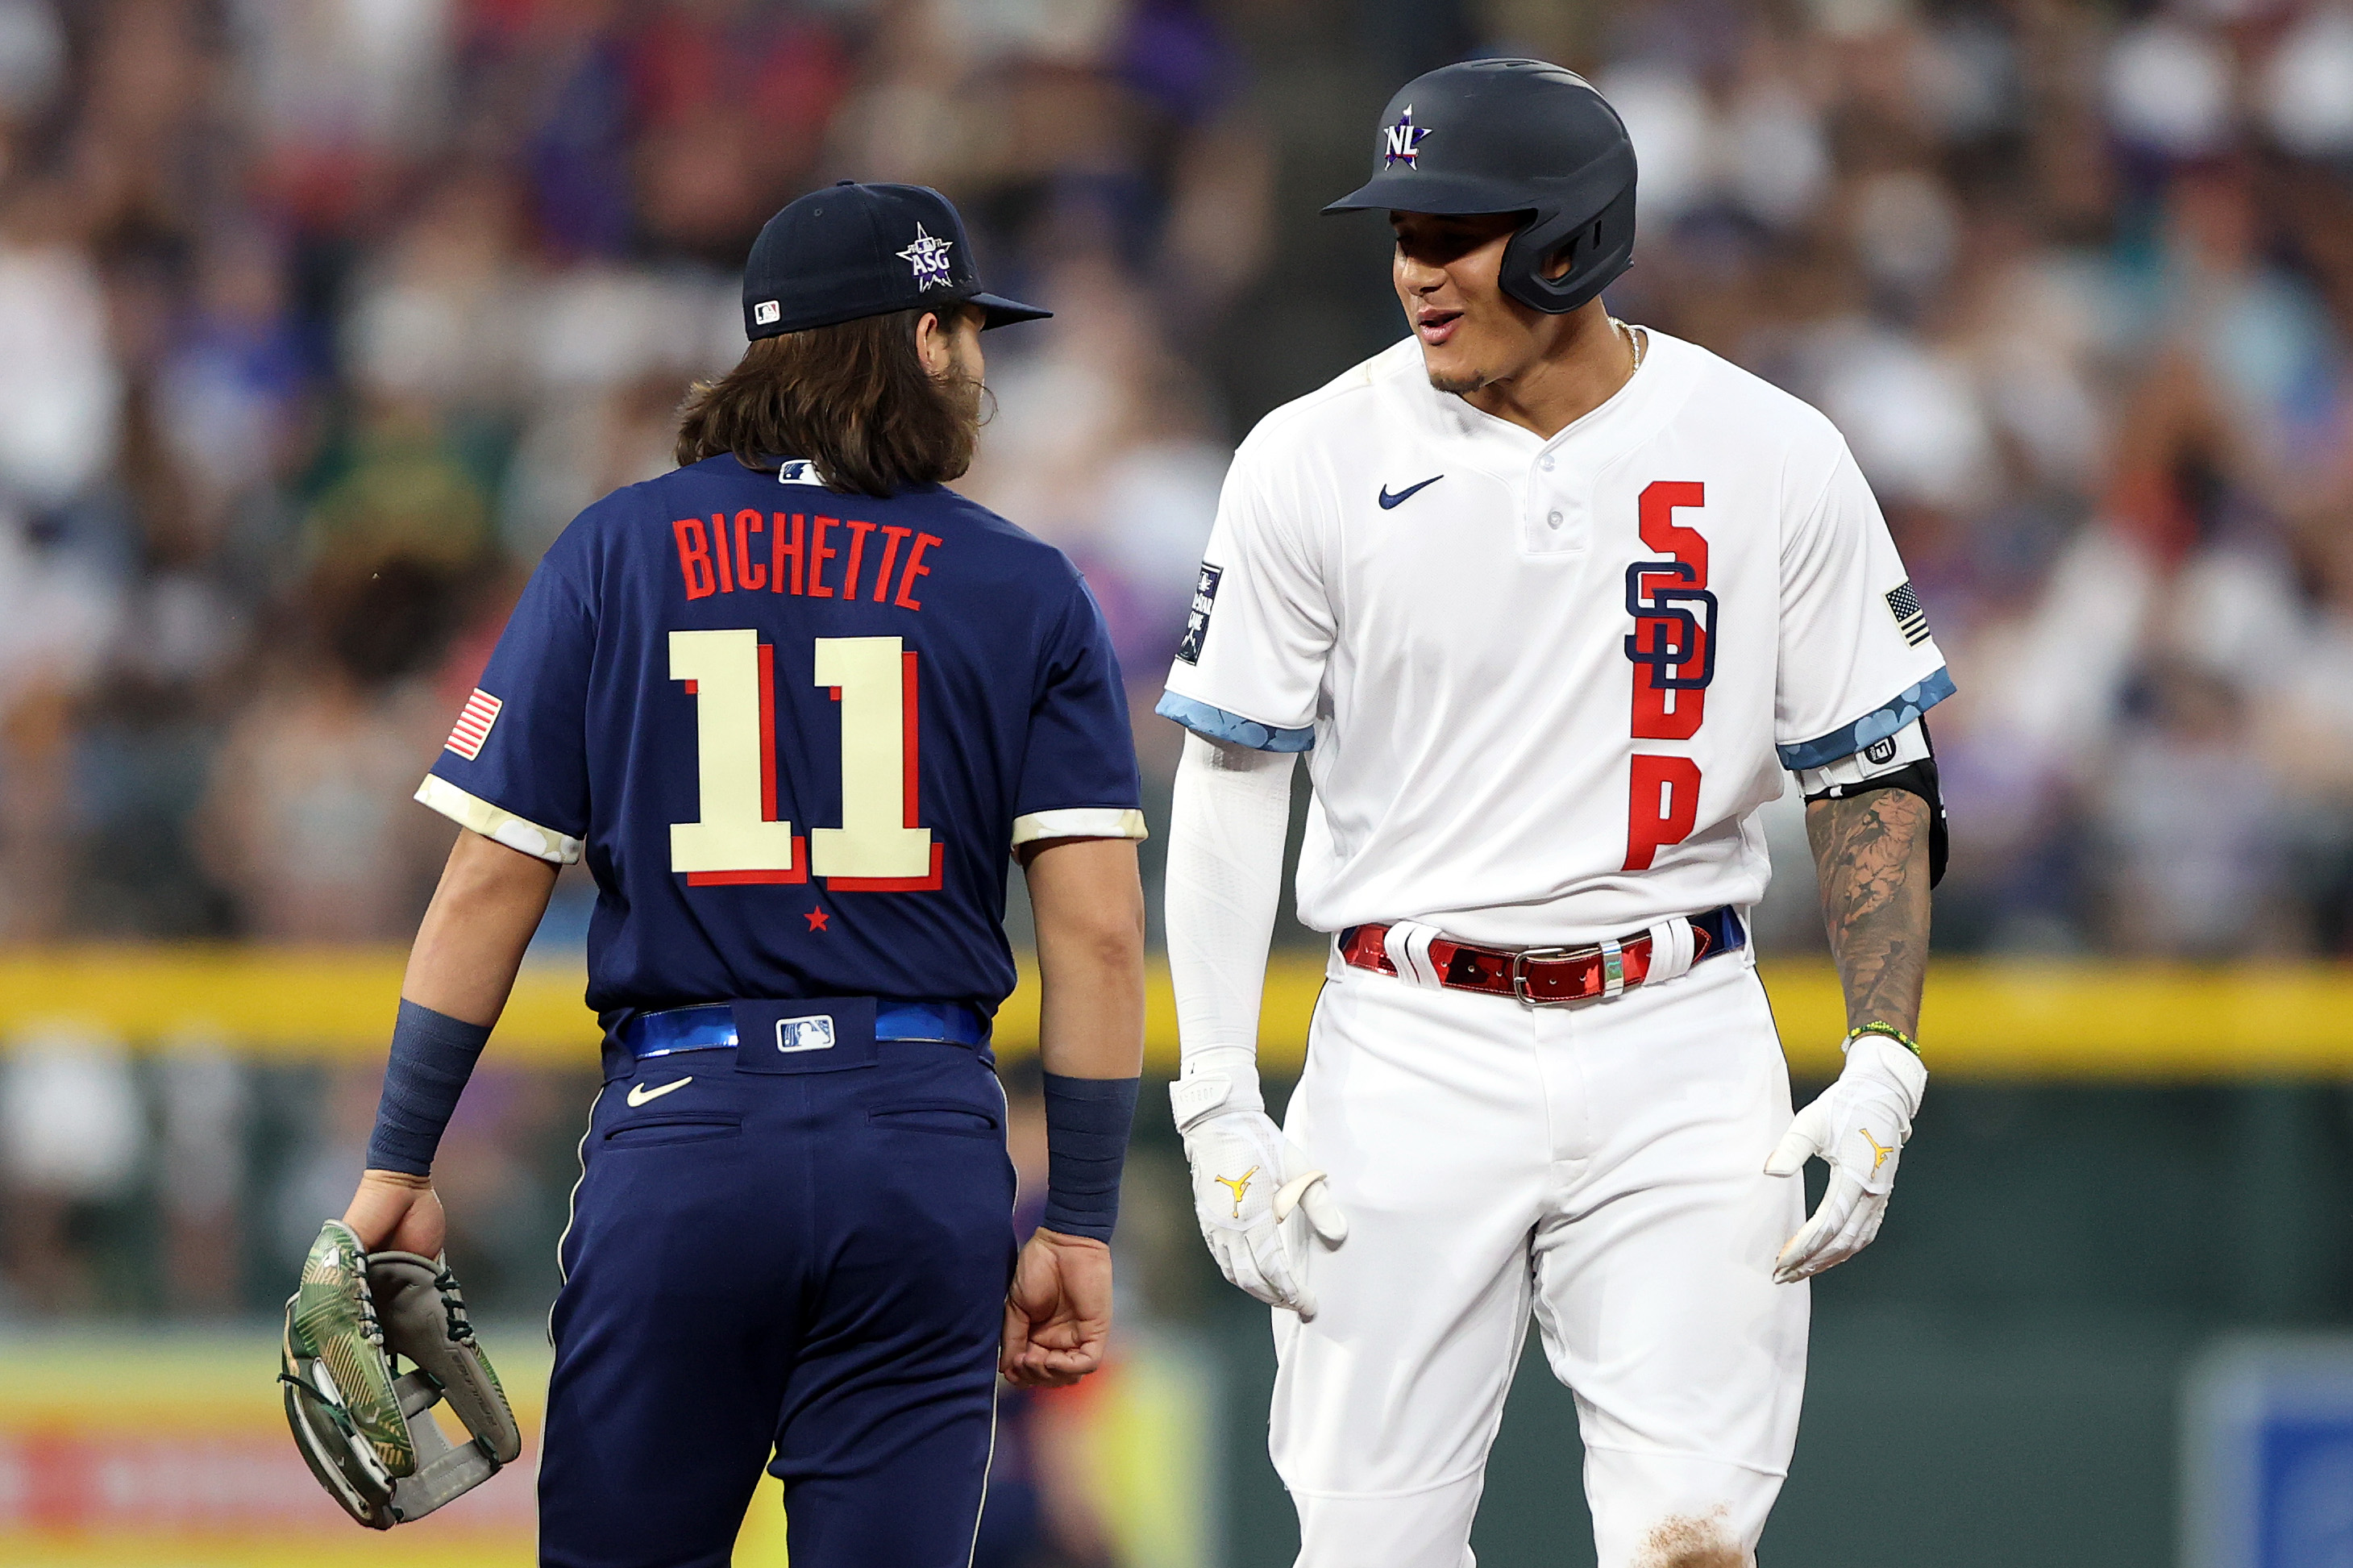 MLB All-Star Game Uniforms Not Drawing All-Star Reviews